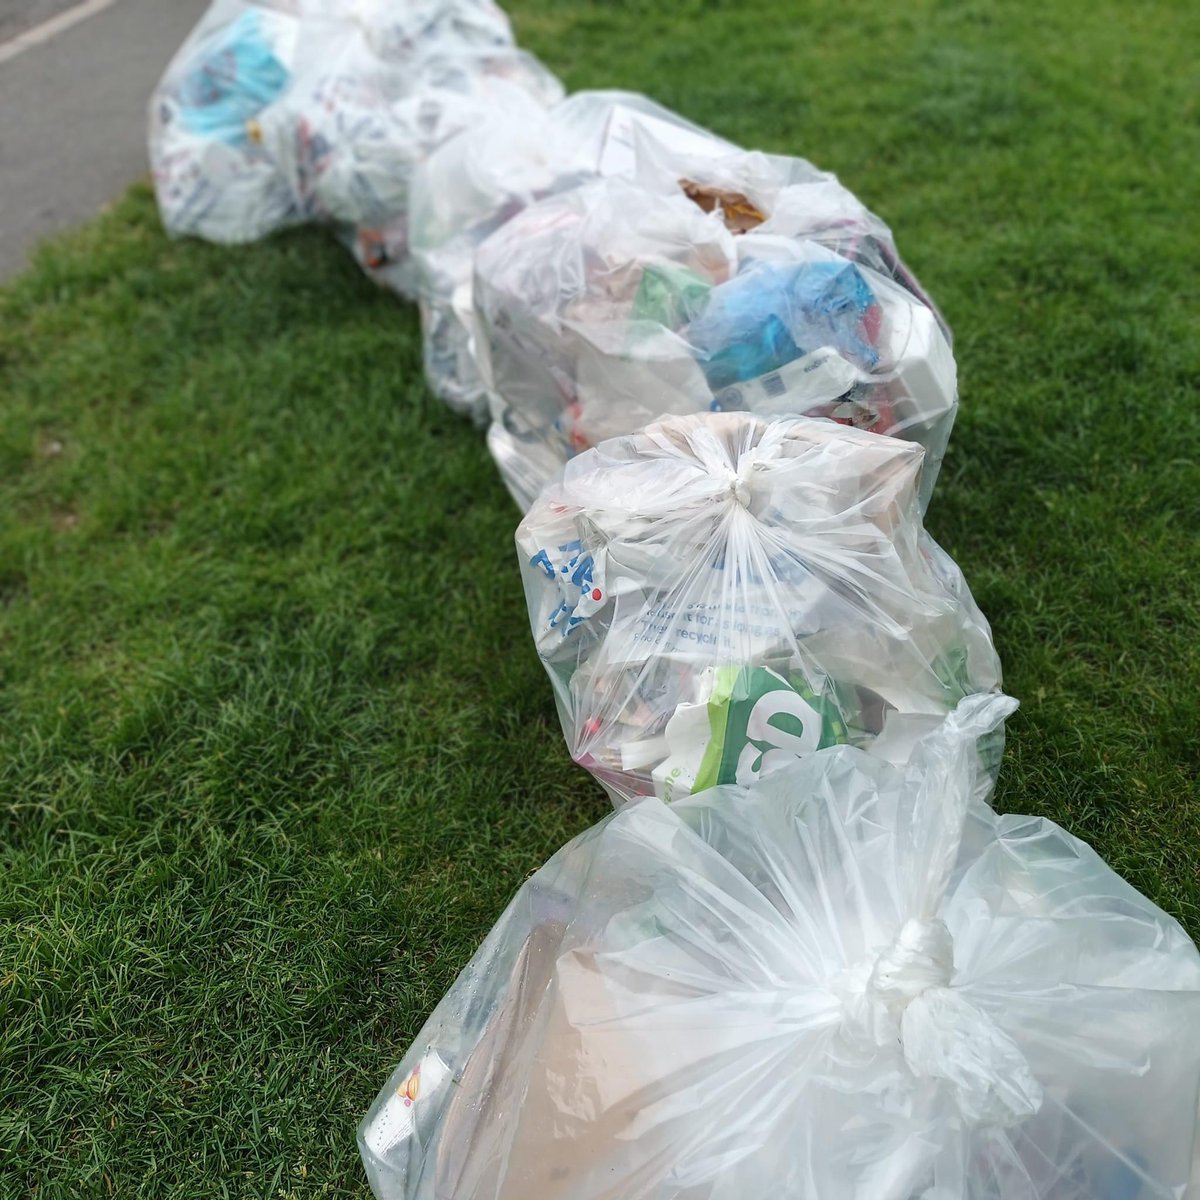 A HUGE effort from James with these bags from Croxteth Gate, Sefton Park 

5 bags of litter 

Whatever your views on bins, do we have enough? Why can’t we have the big euro bins back in Sefton Park during the summer? should people be expected to take it home? More LSSL staff ❤️